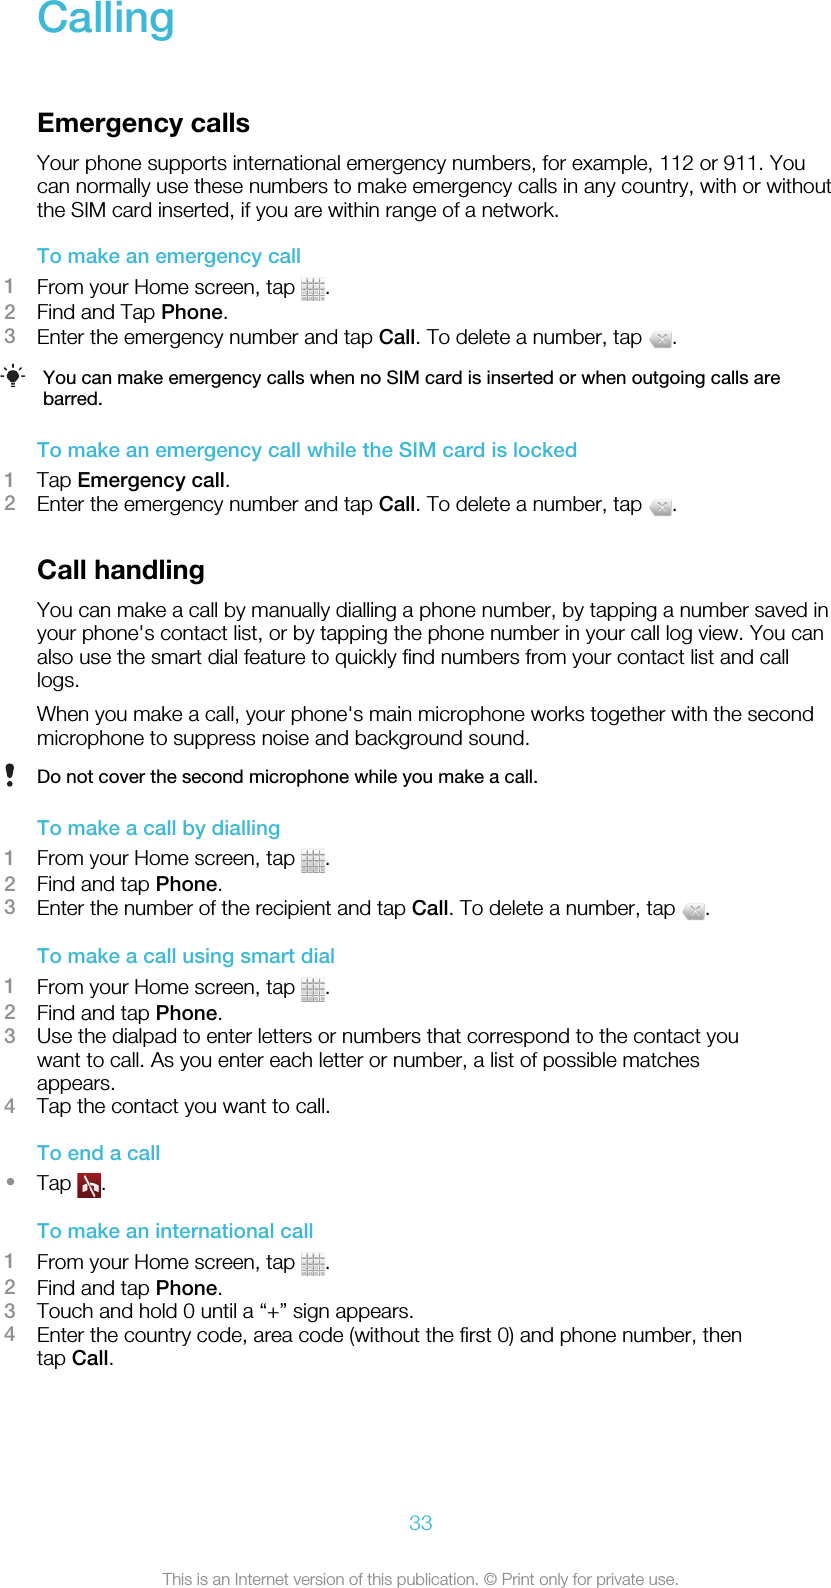 CallingEmergency callsYour phone supports international emergency numbers, for example, 112 or 911. Youcan normally use these numbers to make emergency calls in any country, with or withoutthe SIM card inserted, if you are within range of a network.To make an emergency call1From your Home screen, tap  .2Find and Tap Phone.3Enter the emergency number and tap Call. To delete a number, tap  .You can make emergency calls when no SIM card is inserted or when outgoing calls arebarred.To make an emergency call while the SIM card is locked1Tap Emergency call.2Enter the emergency number and tap Call. To delete a number, tap  .Call handlingYou can make a call by manually dialling a phone number, by tapping a number saved inyour phone&apos;s contact list, or by tapping the phone number in your call log view. You canalso use the smart dial feature to quickly find numbers from your contact list and calllogs.When you make a call, your phone&apos;s main microphone works together with the secondmicrophone to suppress noise and background sound.Do not cover the second microphone while you make a call.To make a call by dialling1From your Home screen, tap  .2Find and tap Phone.3Enter the number of the recipient and tap Call. To delete a number, tap  .To make a call using smart dial1From your Home screen, tap  .2Find and tap Phone.3Use the dialpad to enter letters or numbers that correspond to the contact youwant to call. As you enter each letter or number, a list of possible matchesappears.4Tap the contact you want to call.To end a call•Tap  .To make an international call1From your Home screen, tap  .2Find and tap Phone.3Touch and hold 0 until a “+” sign appears.4Enter the country code, area code (without the first 0) and phone number, thentap Call.33This is an Internet version of this publication. © Print only for private use.